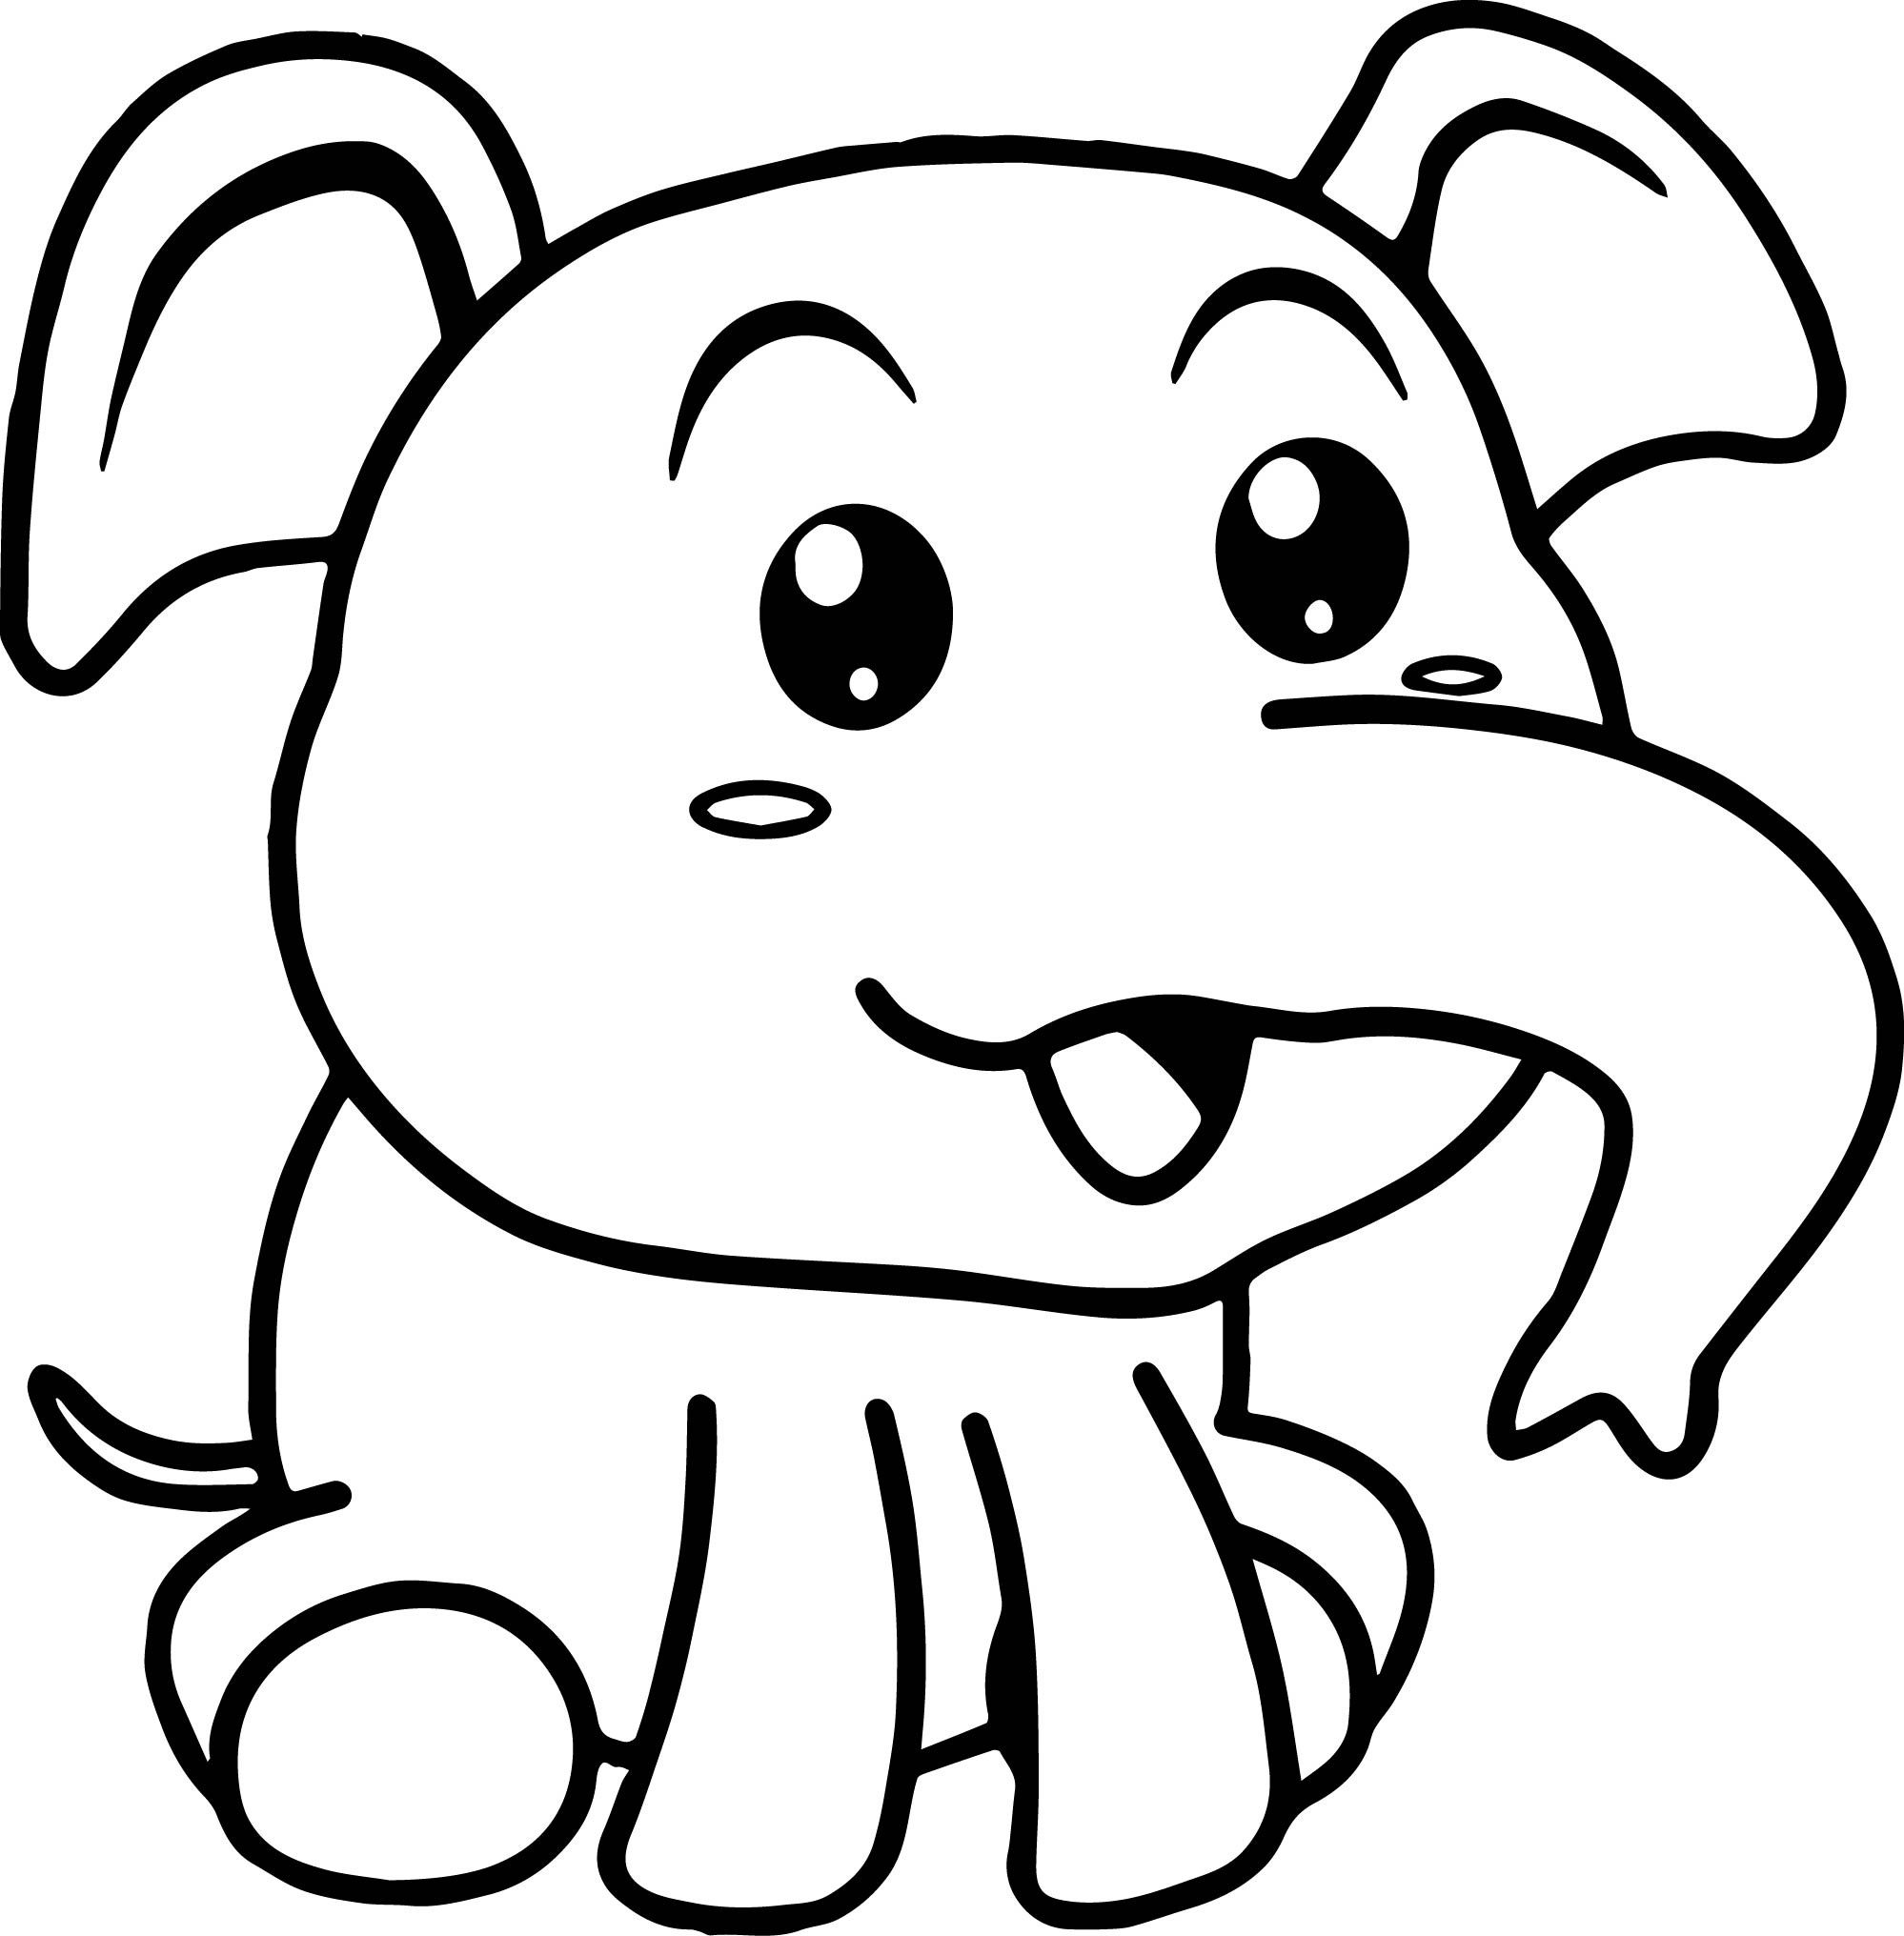 Cute Baby Elephant Coloring Pages
 Cute Baby Elephant Coloring Page